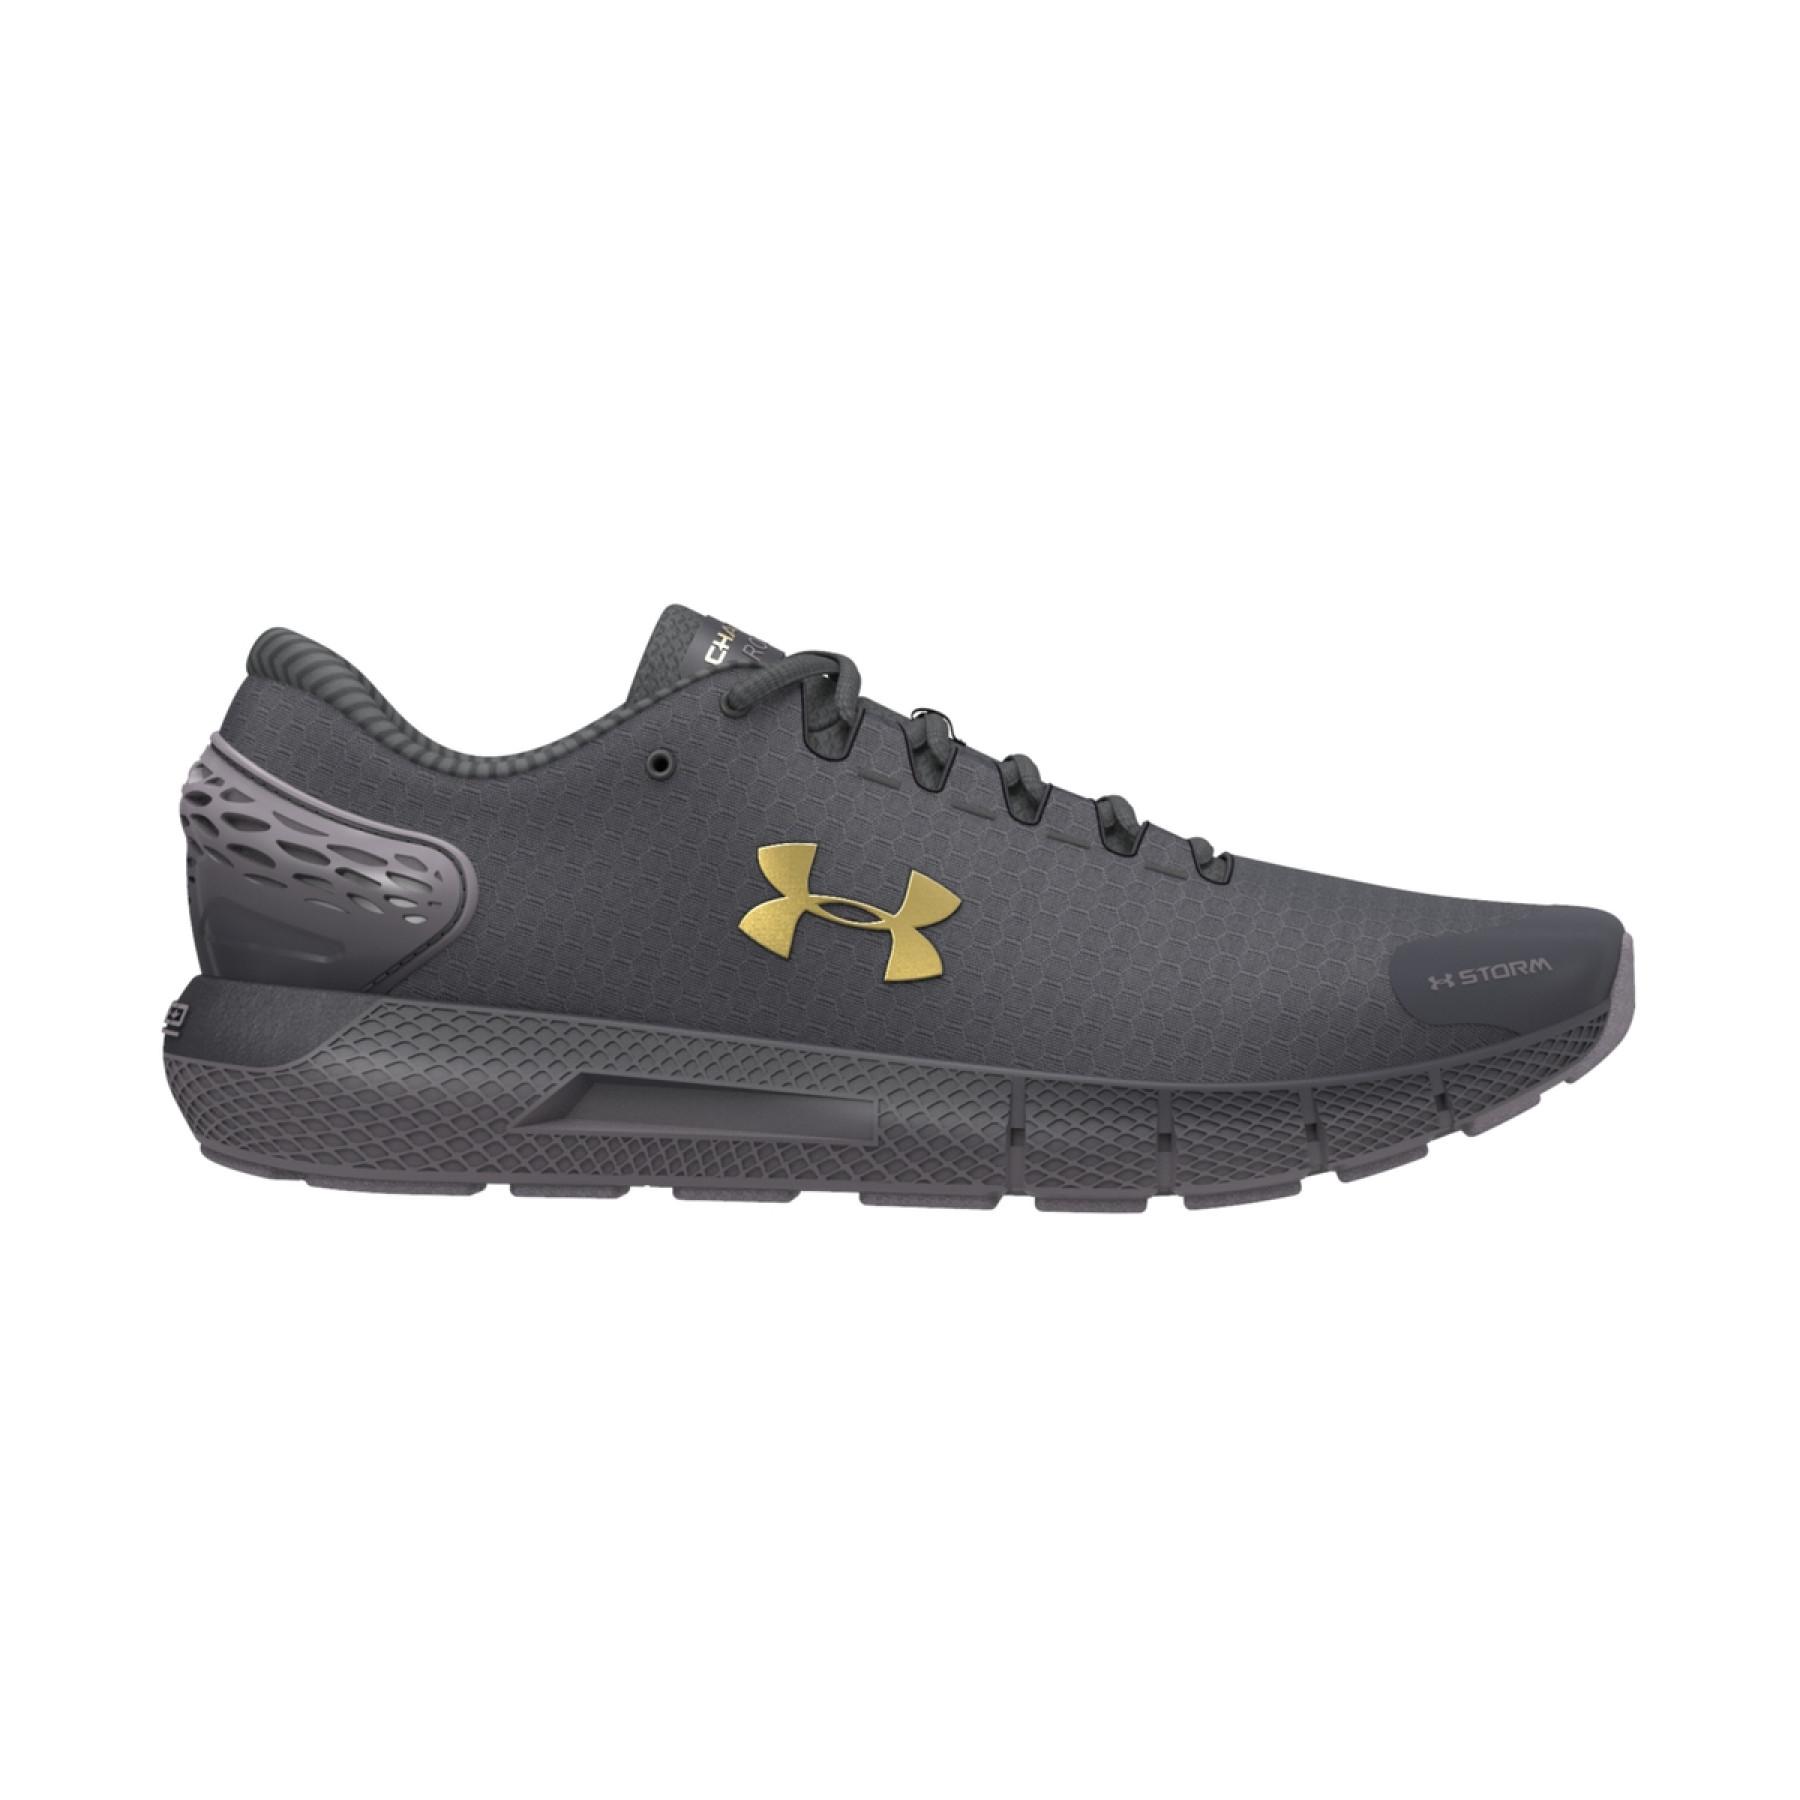 Buty do biegania dla kobiet Under Armour Charged Rogue 2 ColdGear Infrared